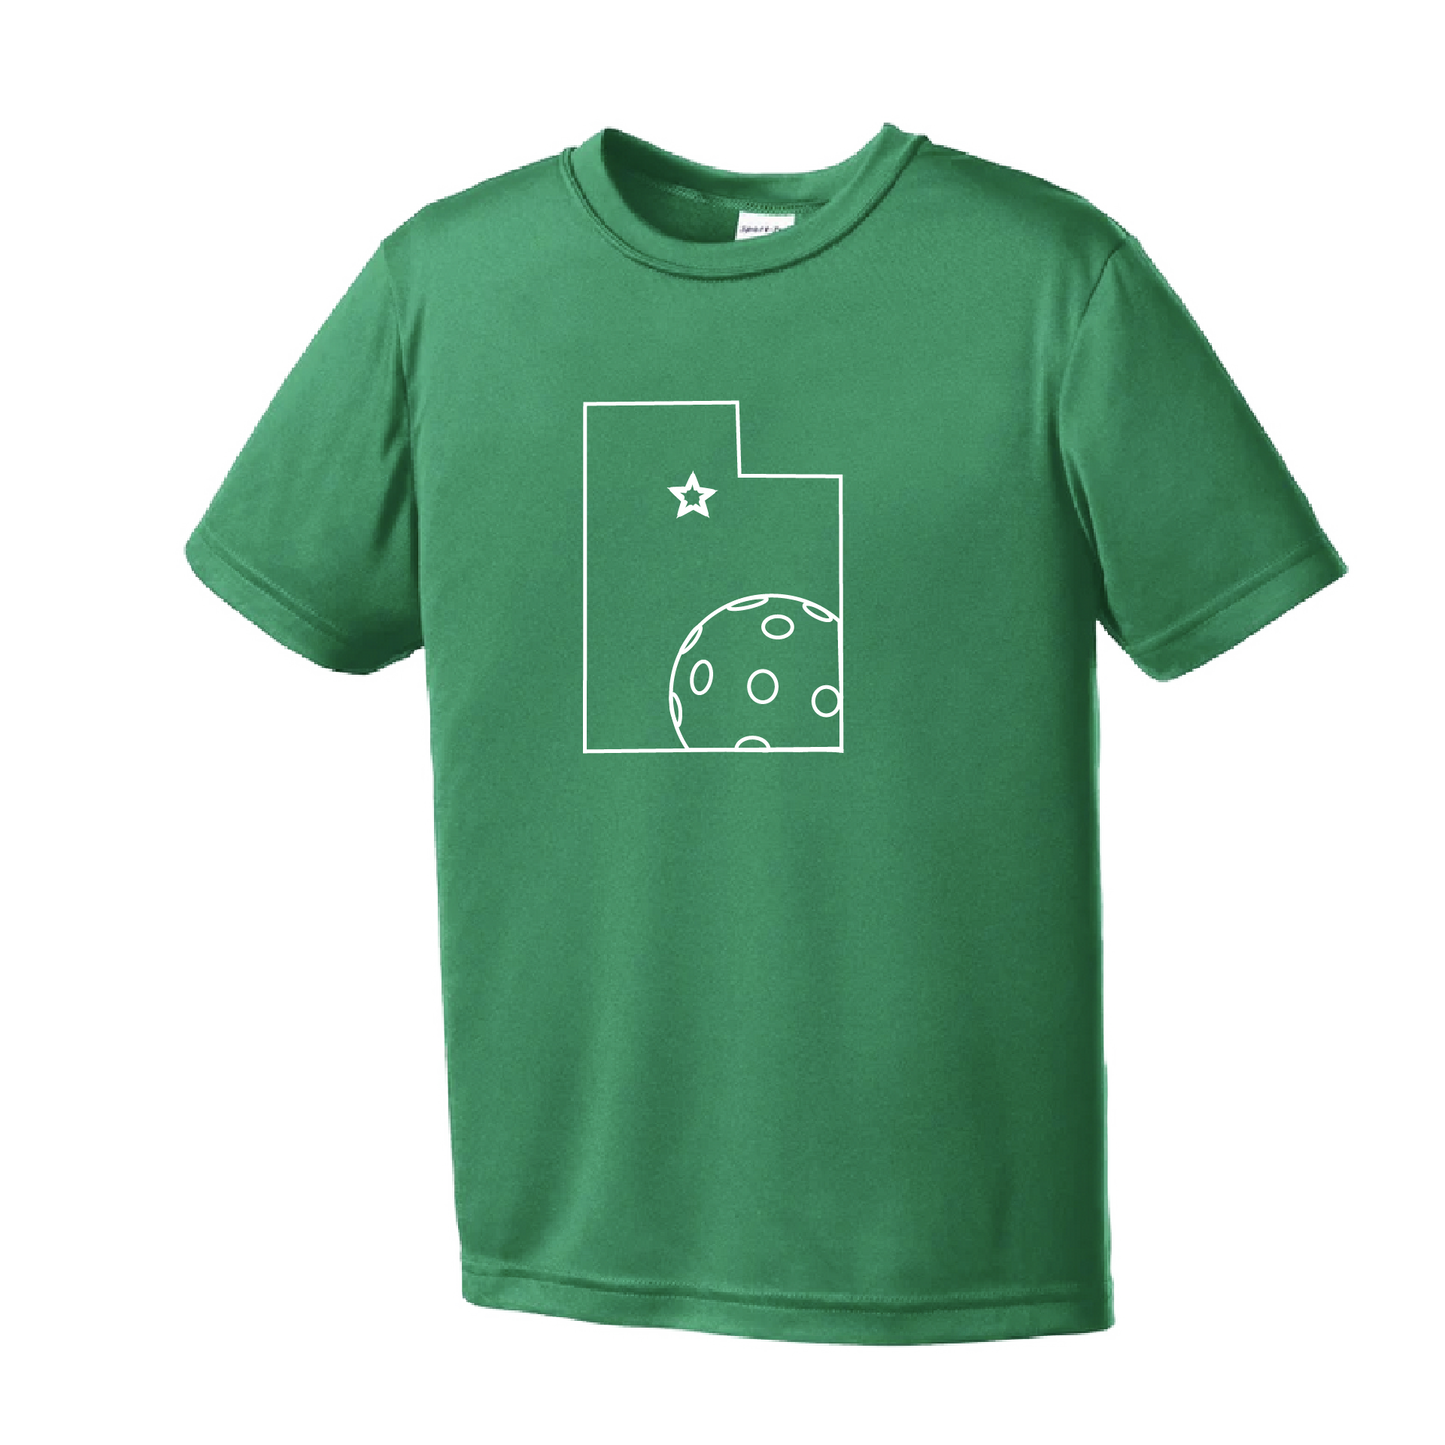 Pickleball Design: Utah with Star and Ball.   Style:  Short-Sleeve  Shirts are lightweight, roomy and highly breathable. These moisture-wicking shirts are designed for athletic performance. They feature PosiCharge technology to lock in color and prevent logos from fading. Removable tag and set-in sleeves for comfort.